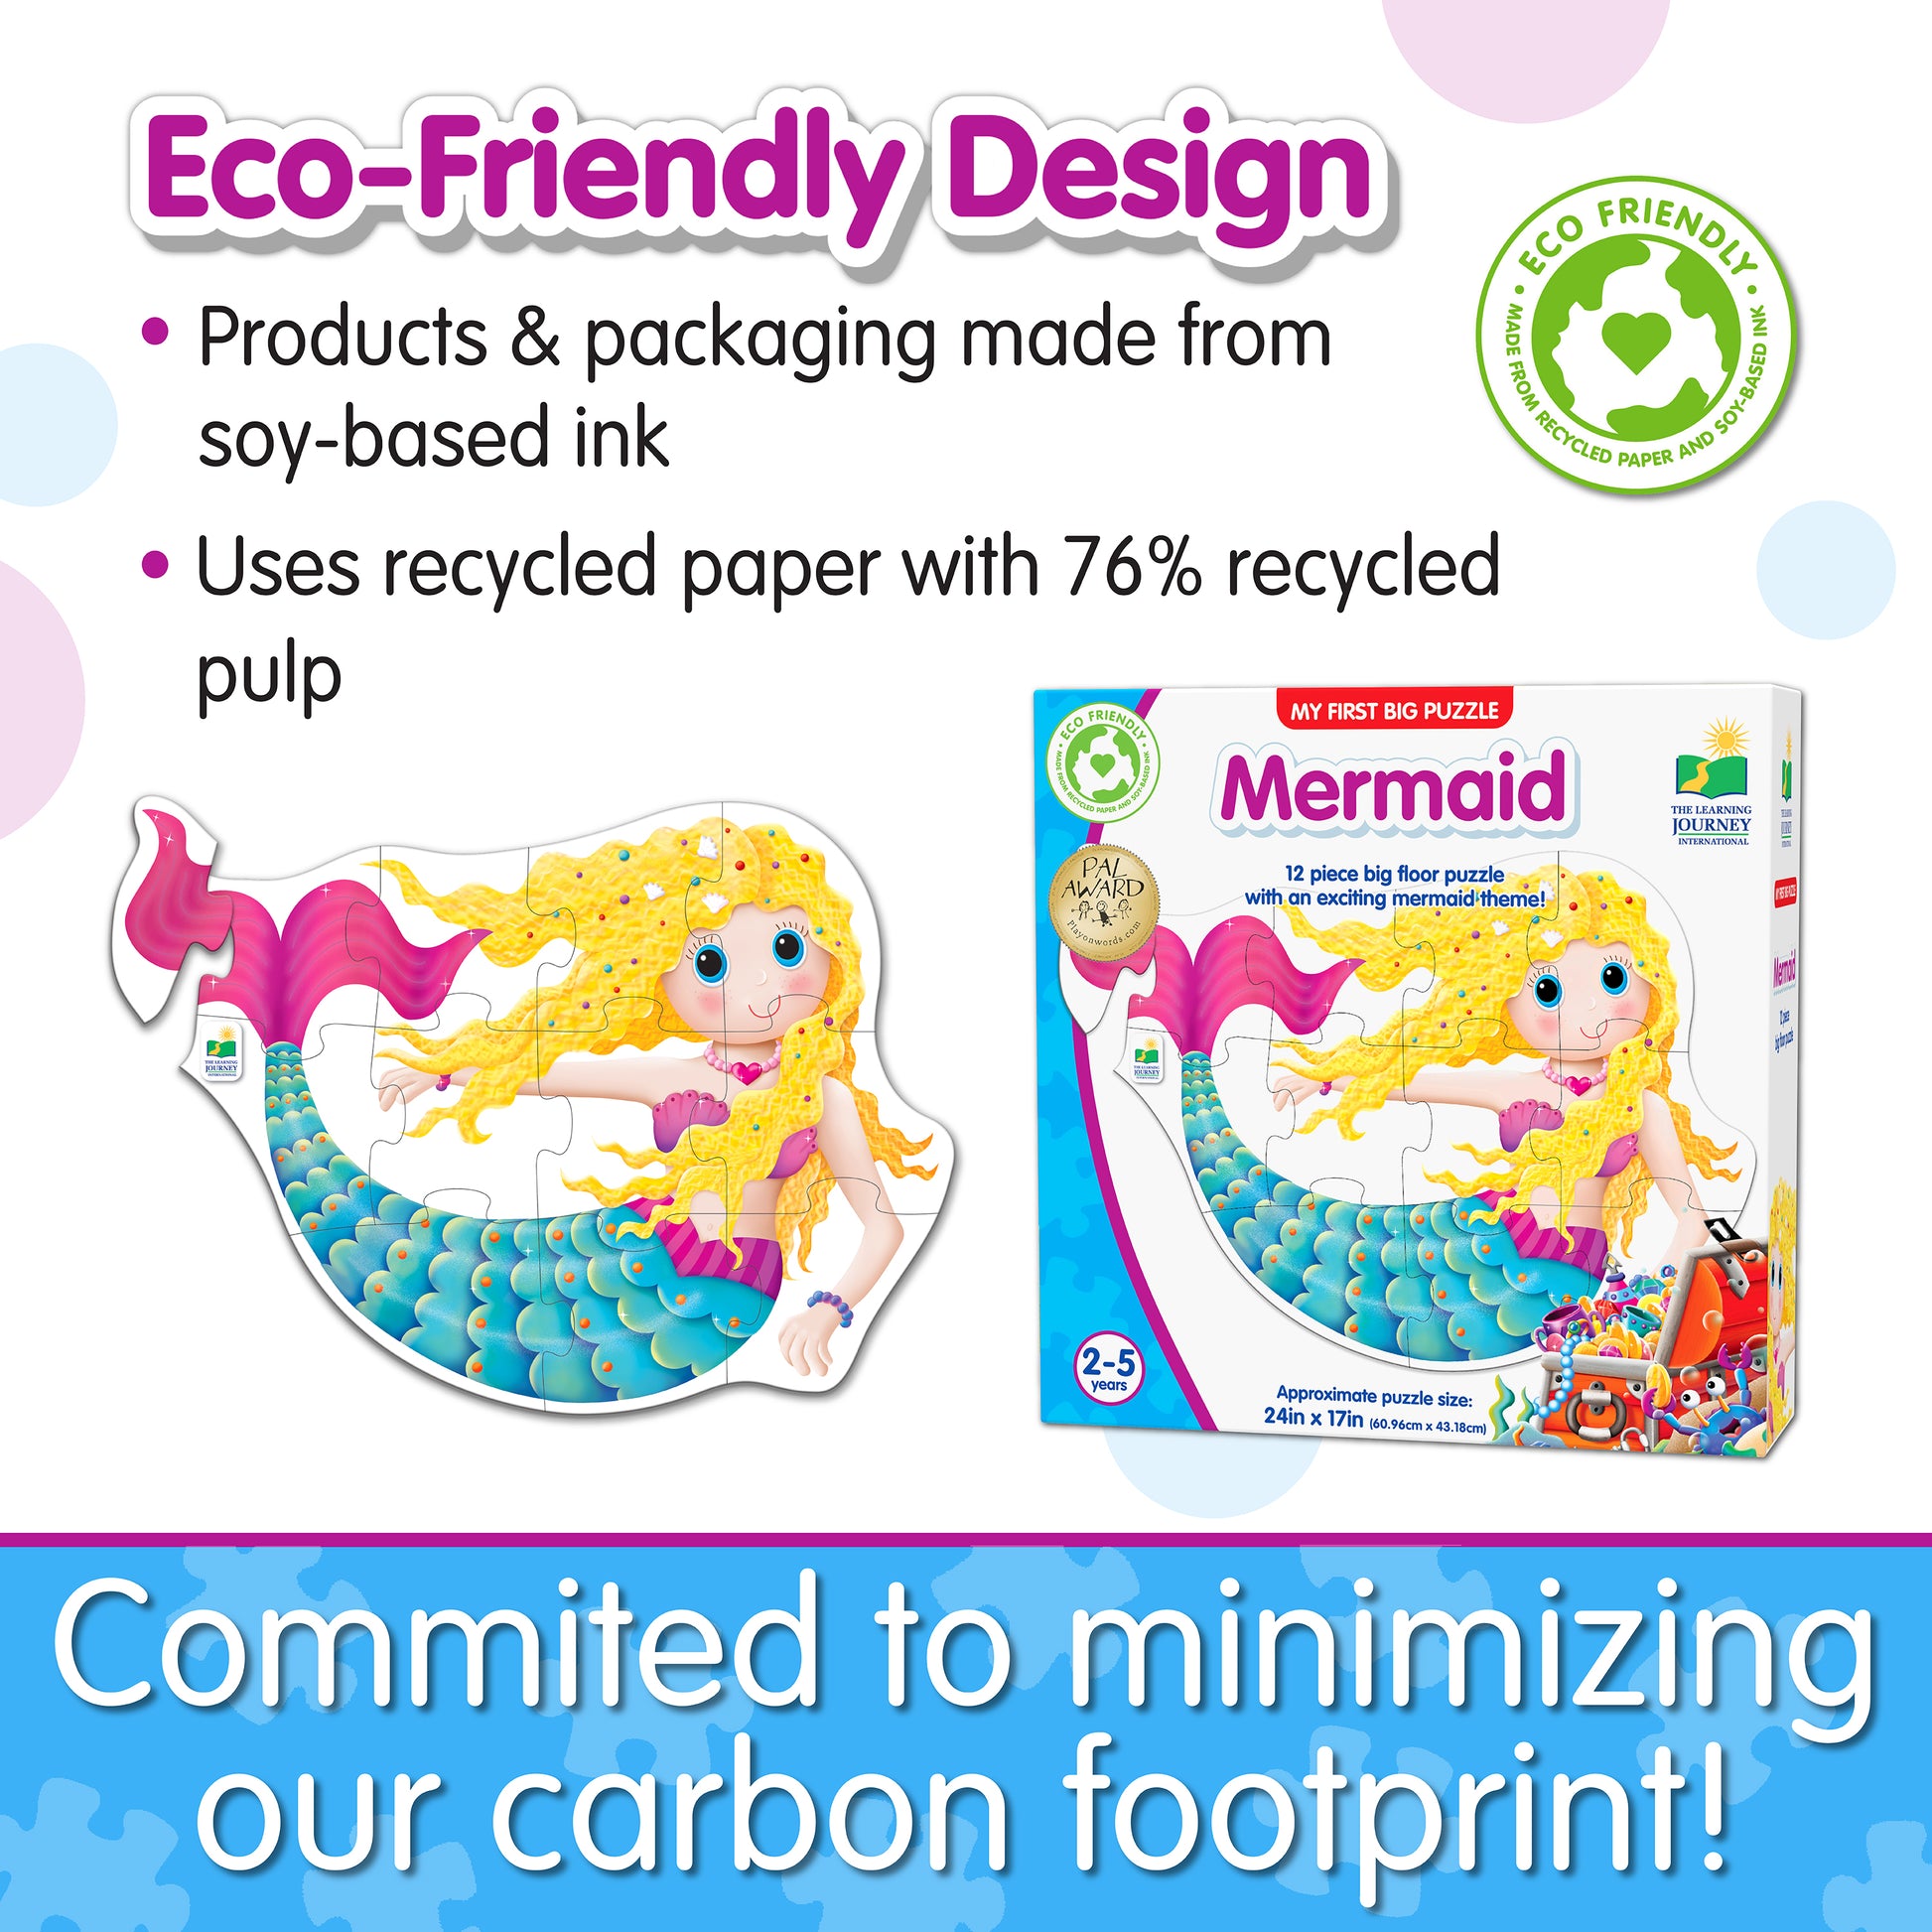 Infographic about My First Big Puzzle - Mermaid's eco-friendly design that says, "Committed to minimizing our carbon footprint!"